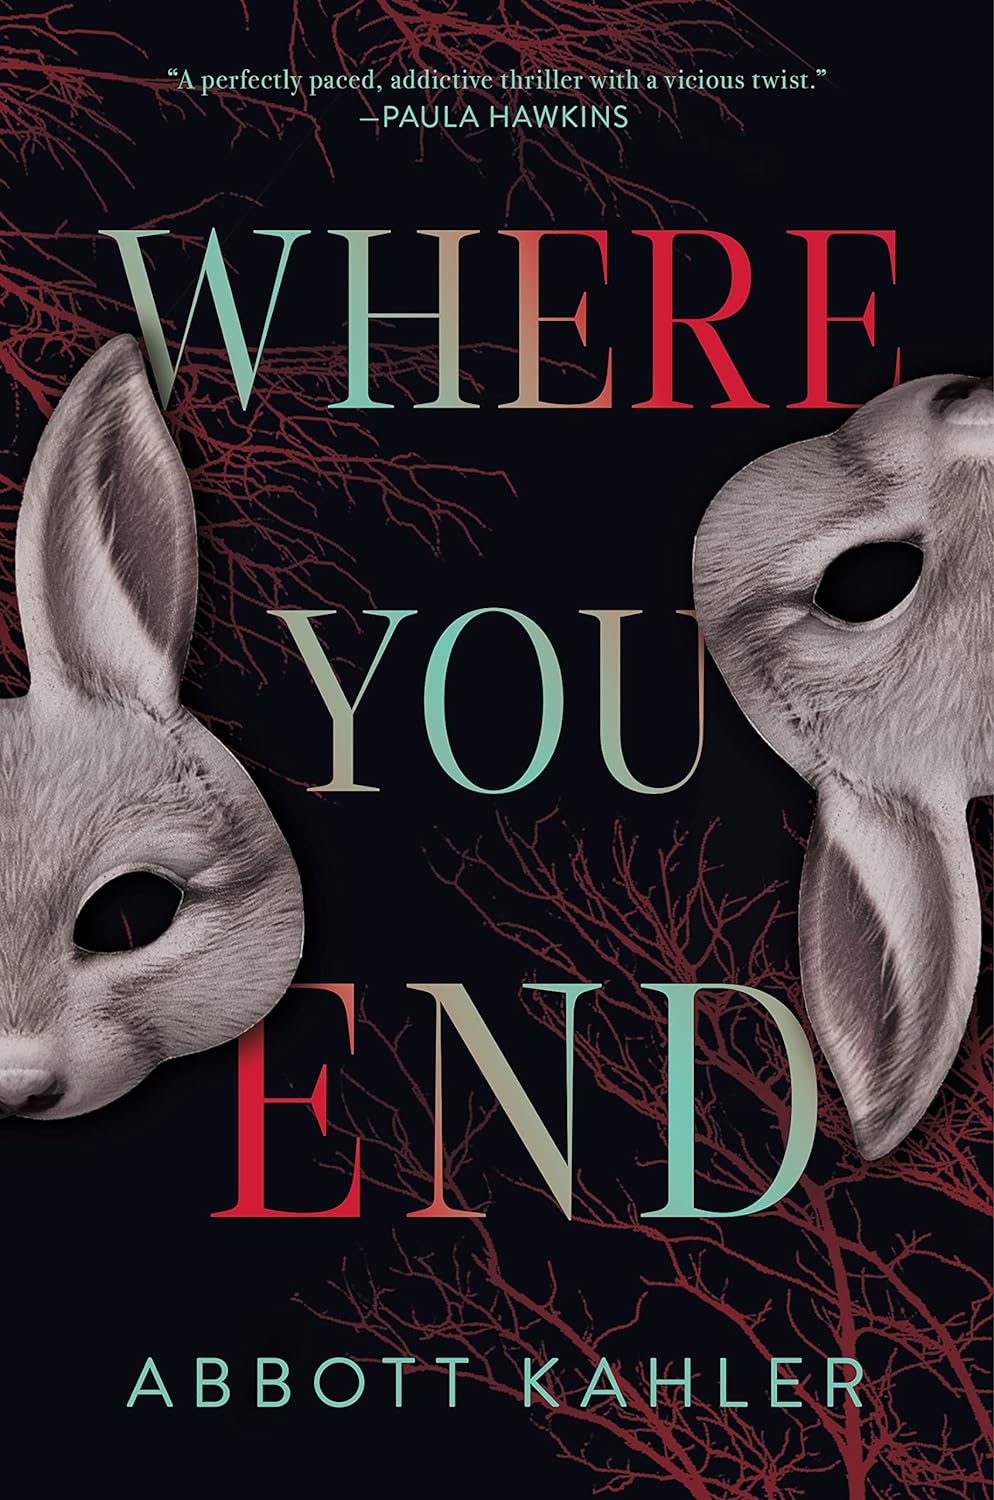 Image for "Where You End"